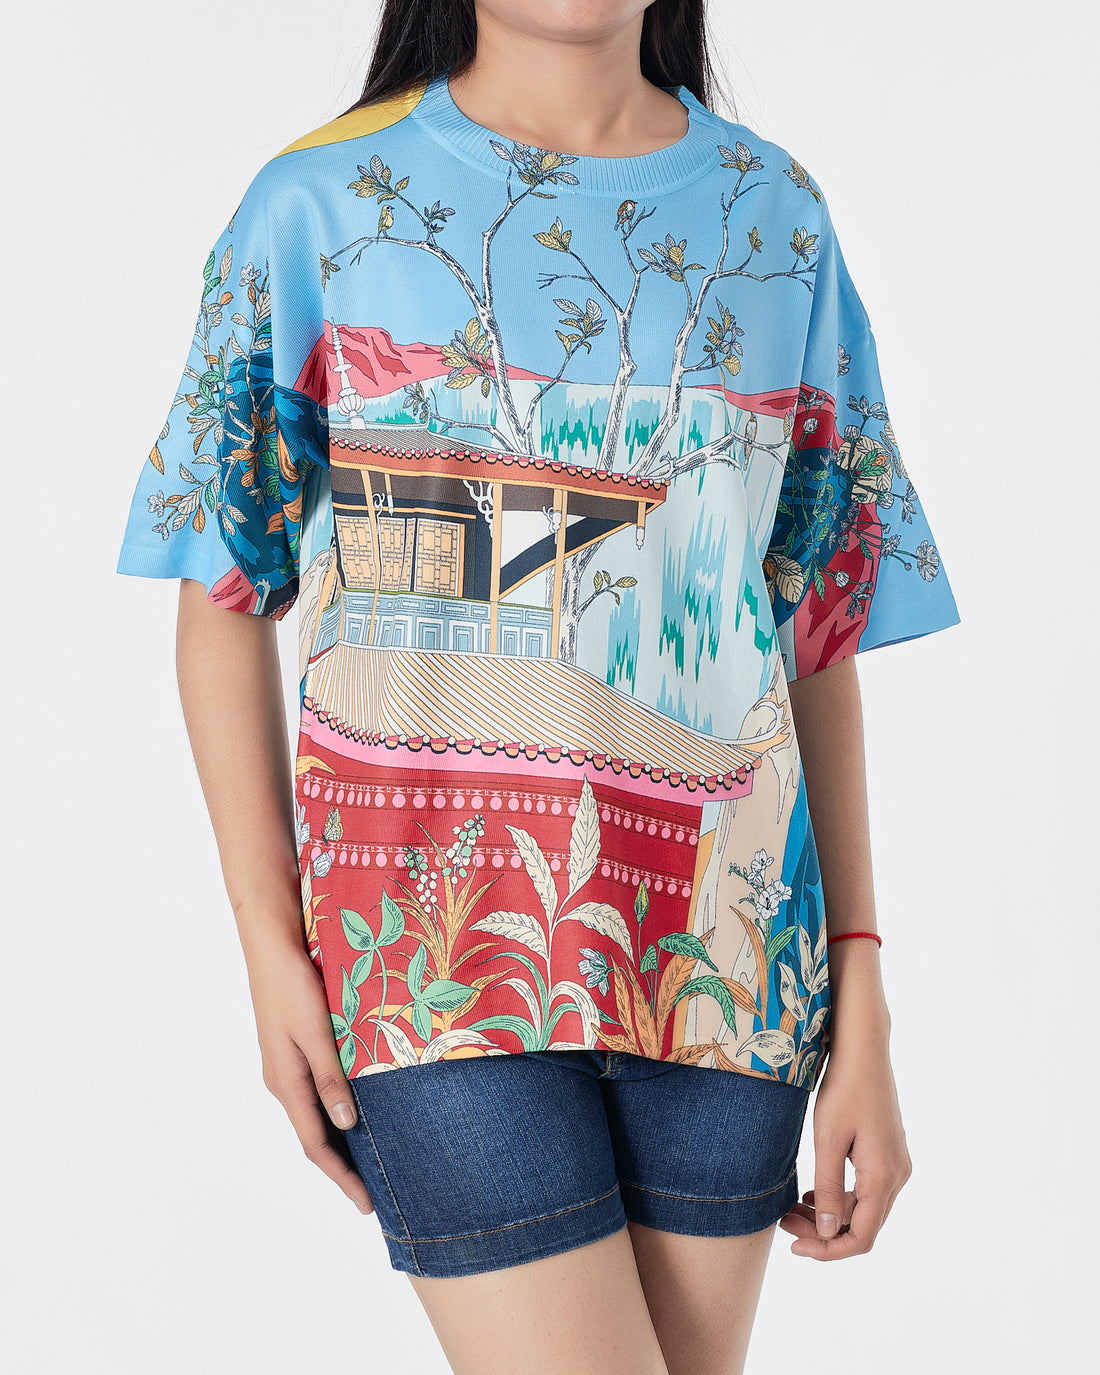 House Painting Lady  T-Shirt 15.90